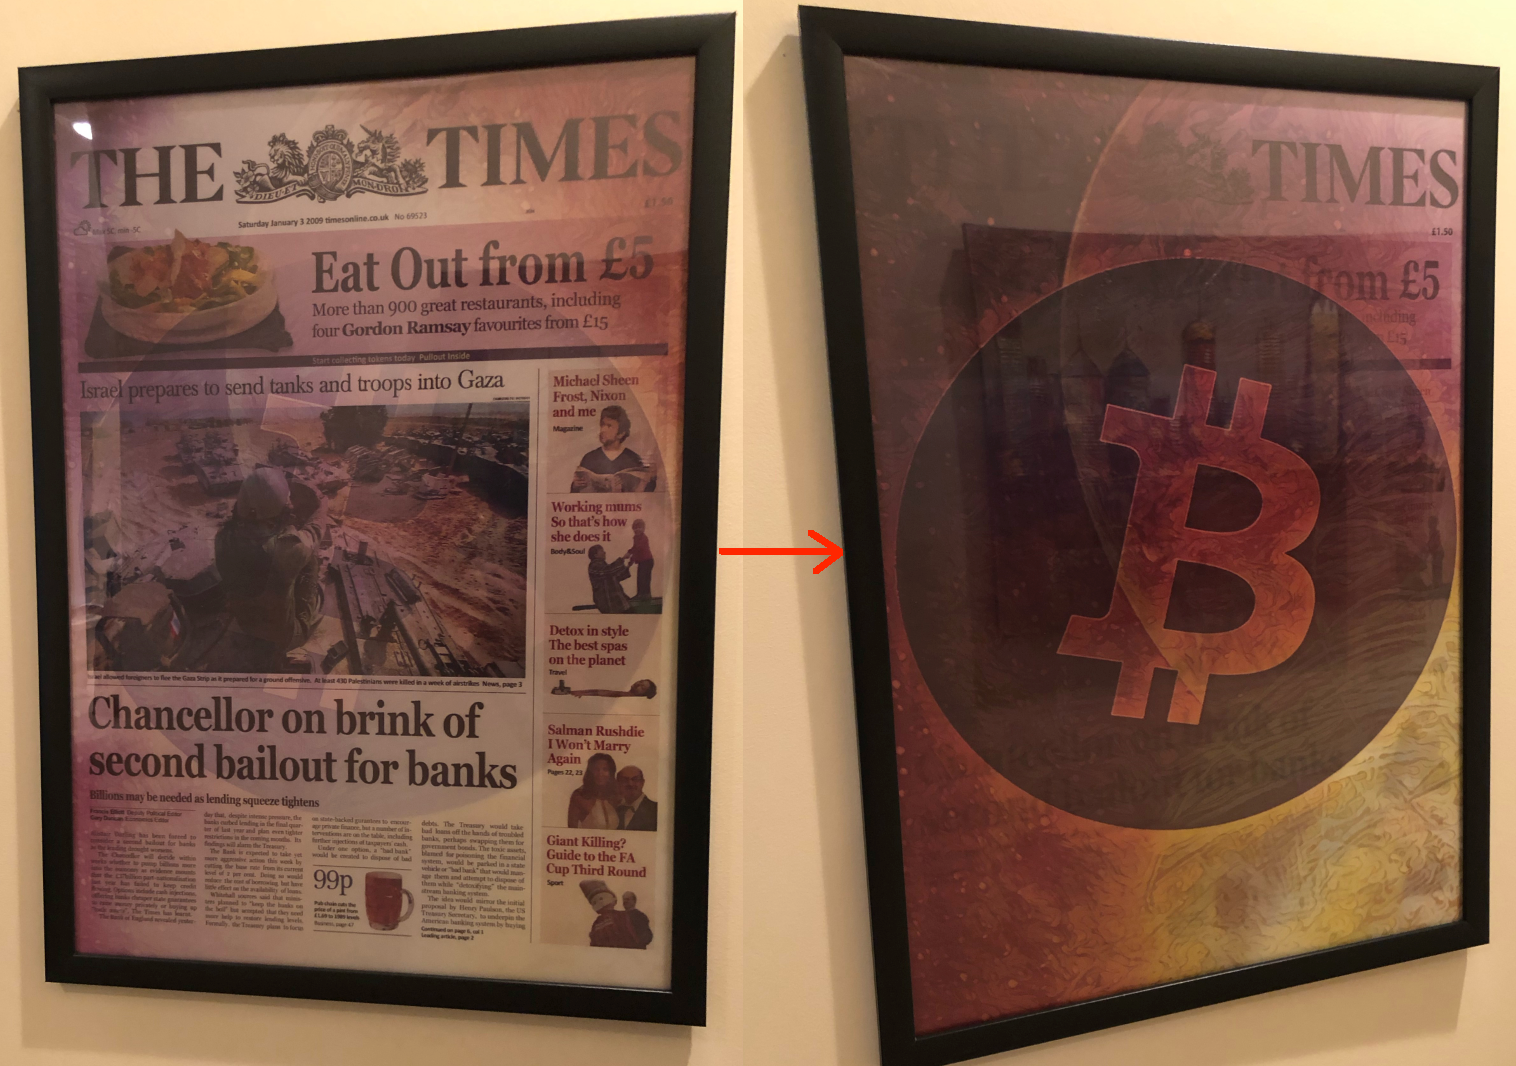 Transitional Lenticular Bitcoin 'The Times' Chancellor On Brink / BItcoin Quantum Leap, Limited to 21